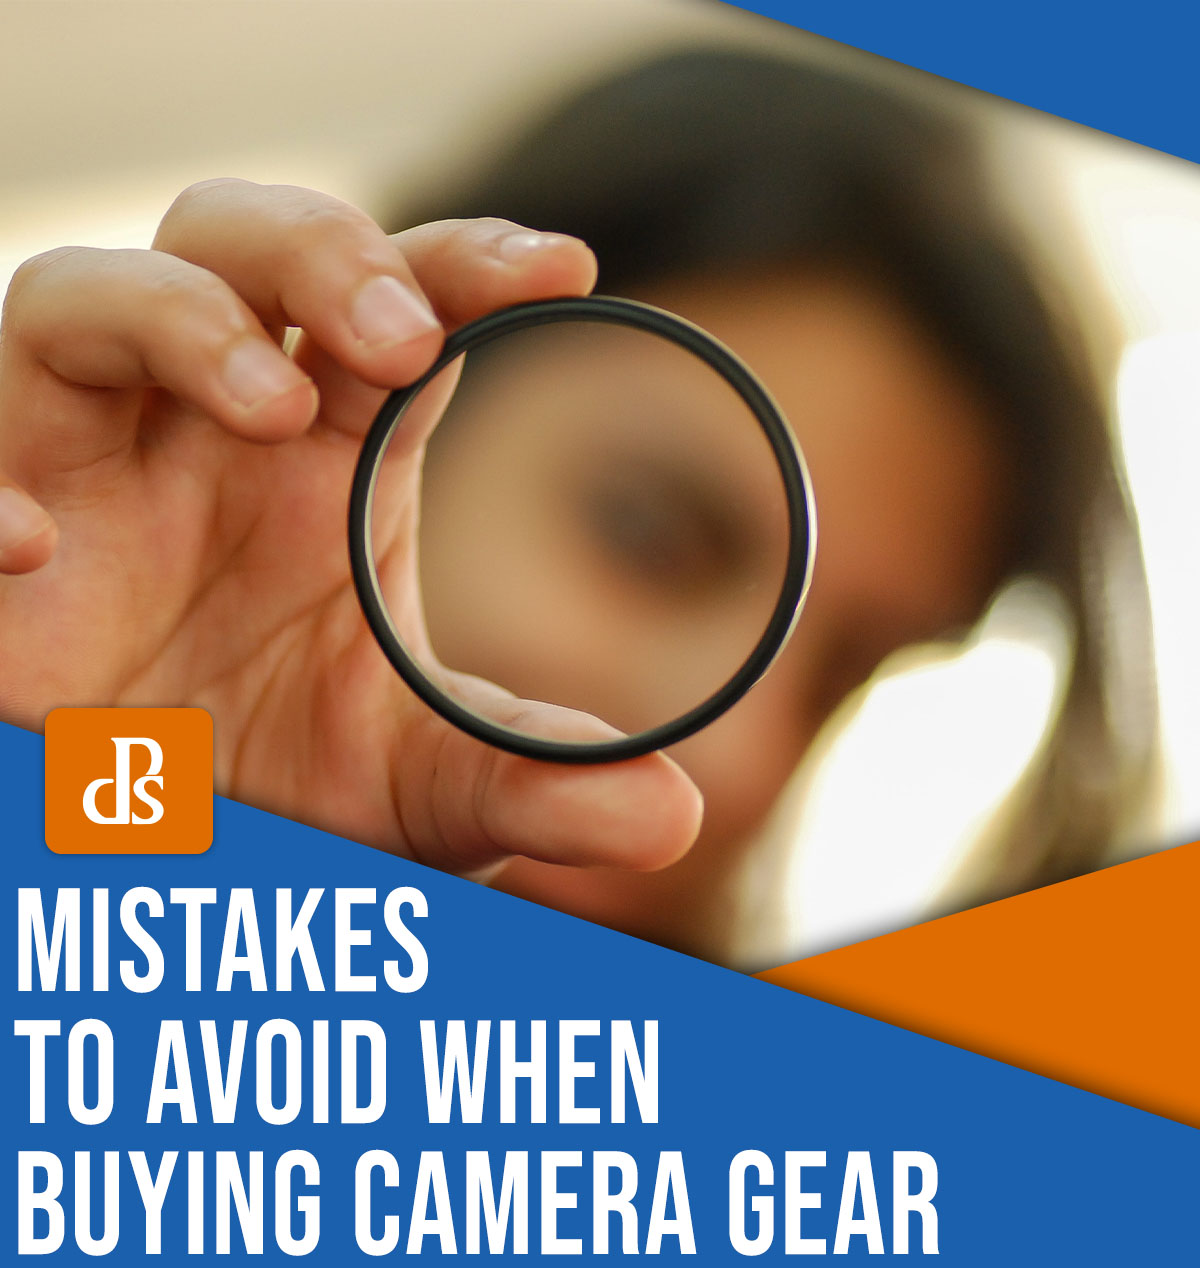 Buying camera gear mistakes